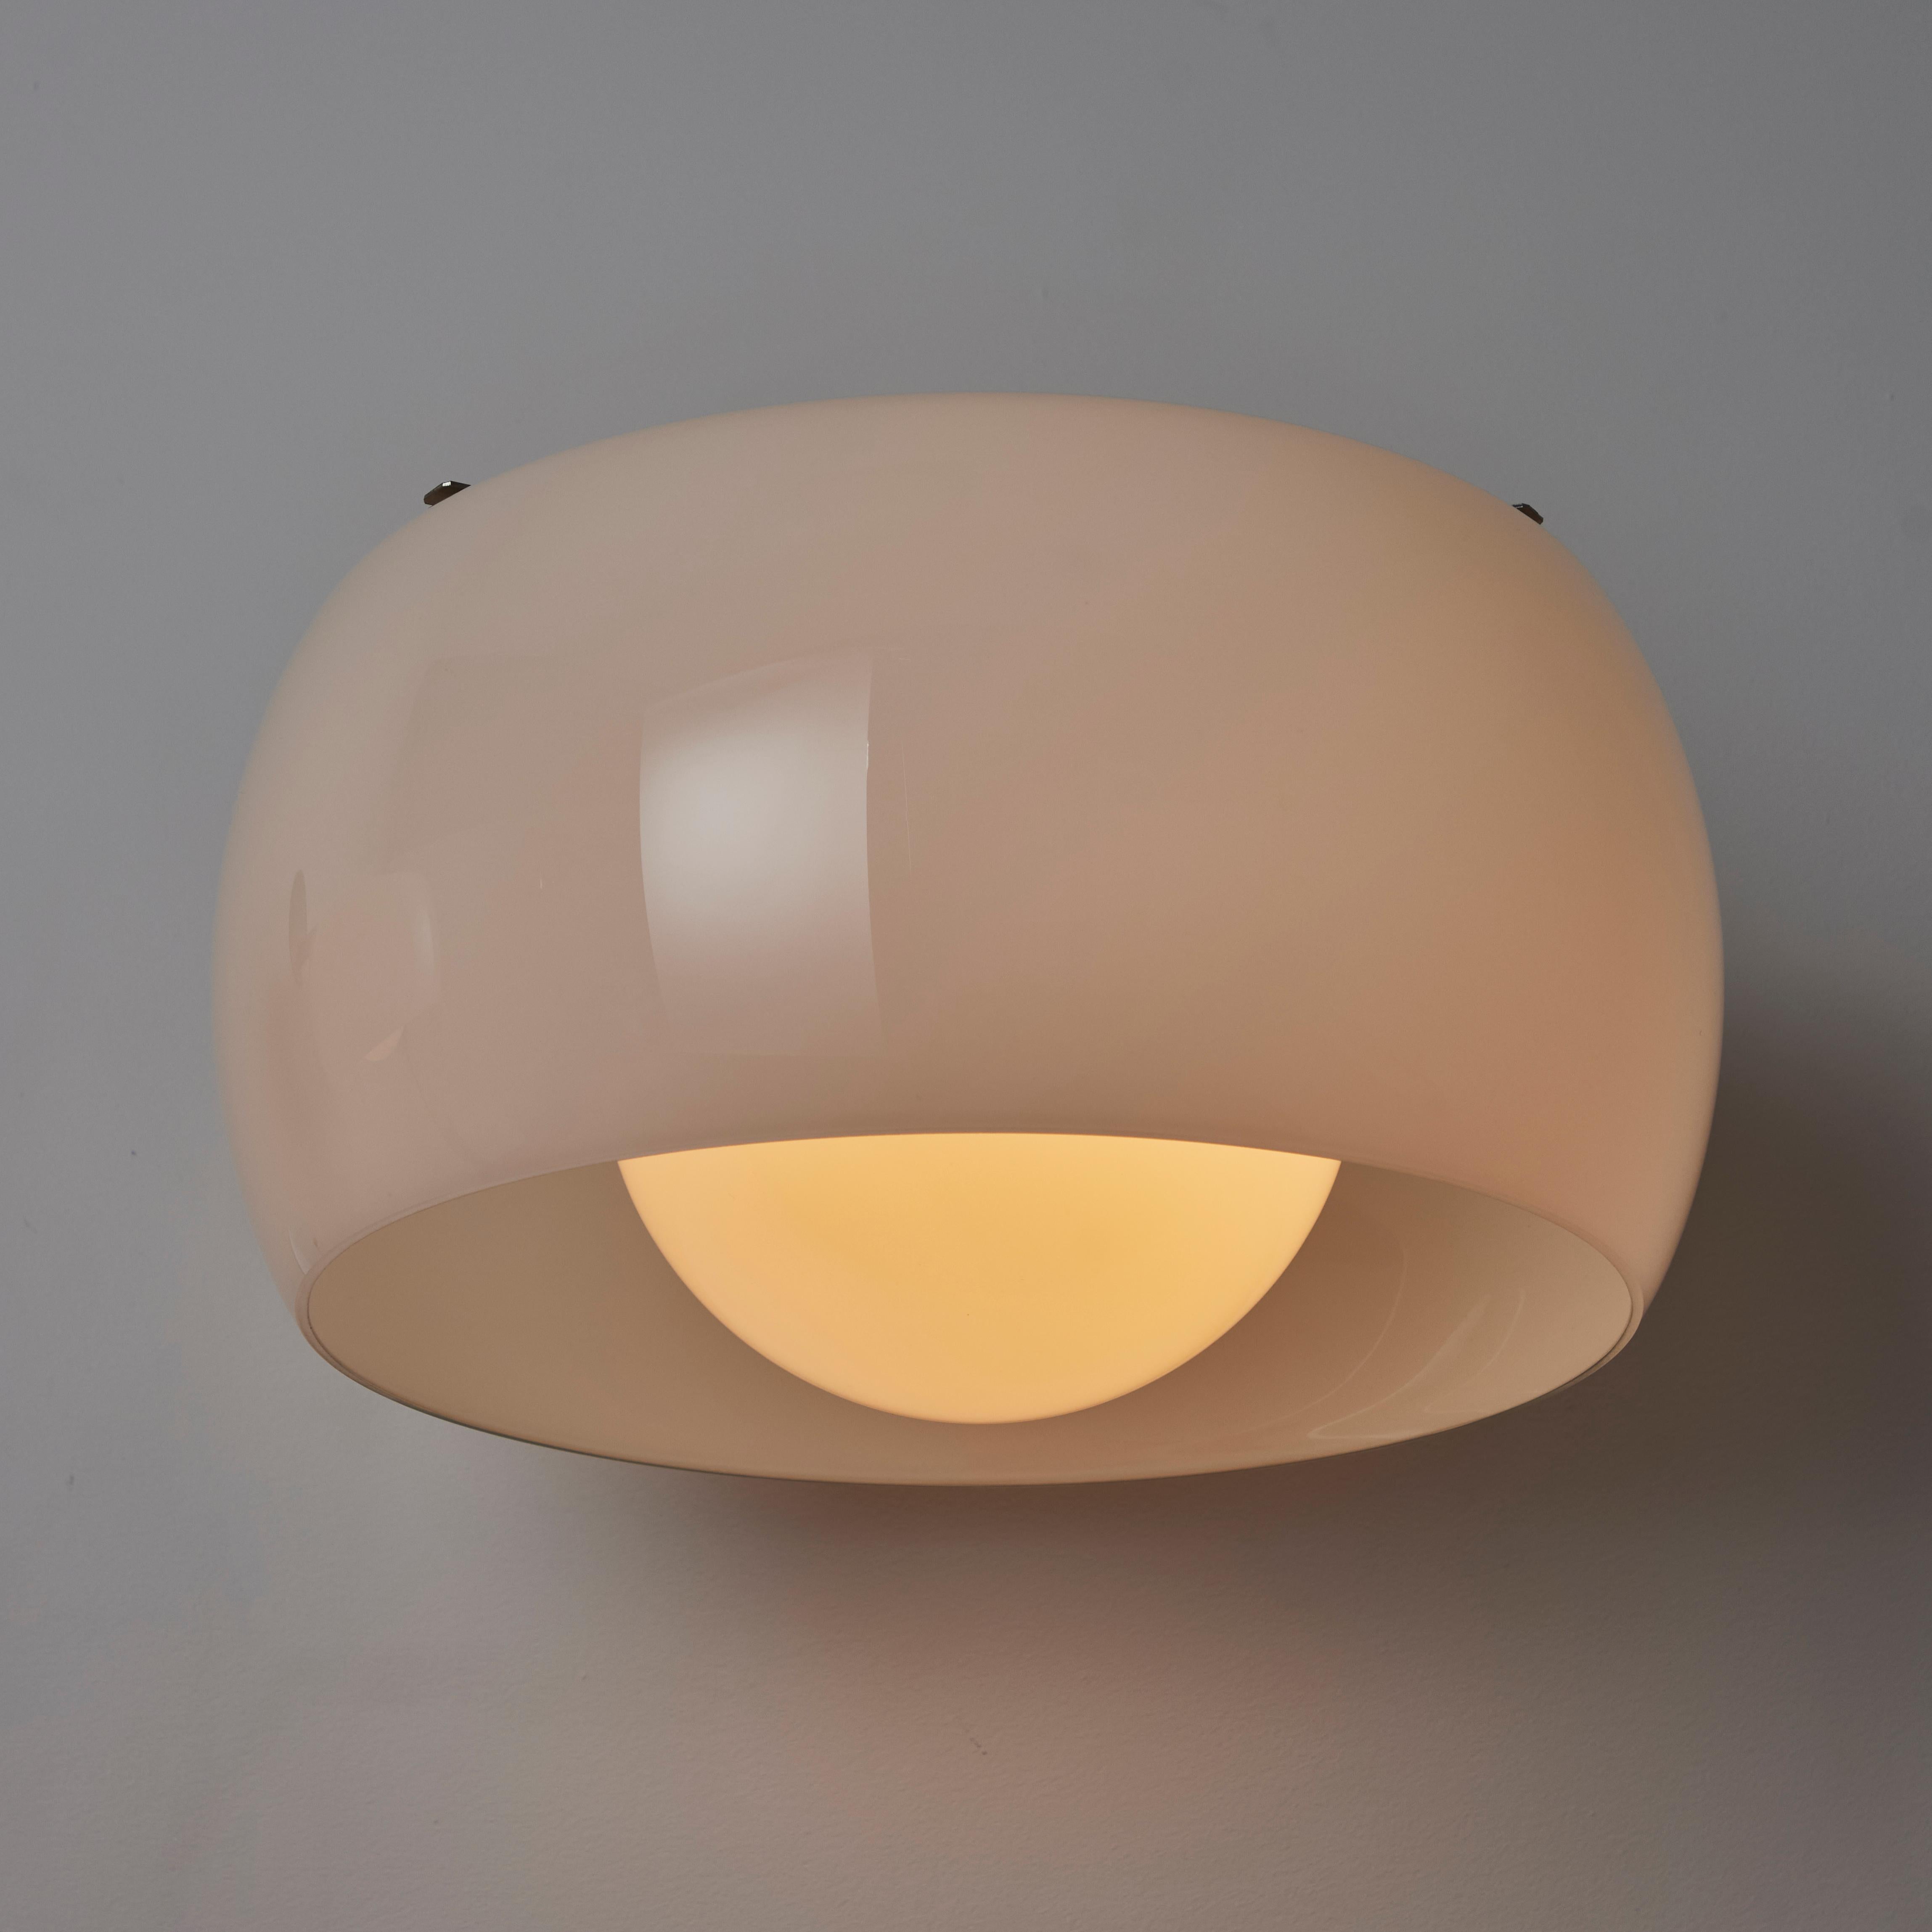 'Clinio' Wall Lights by Vico Magistretti for Artemide For Sale 5